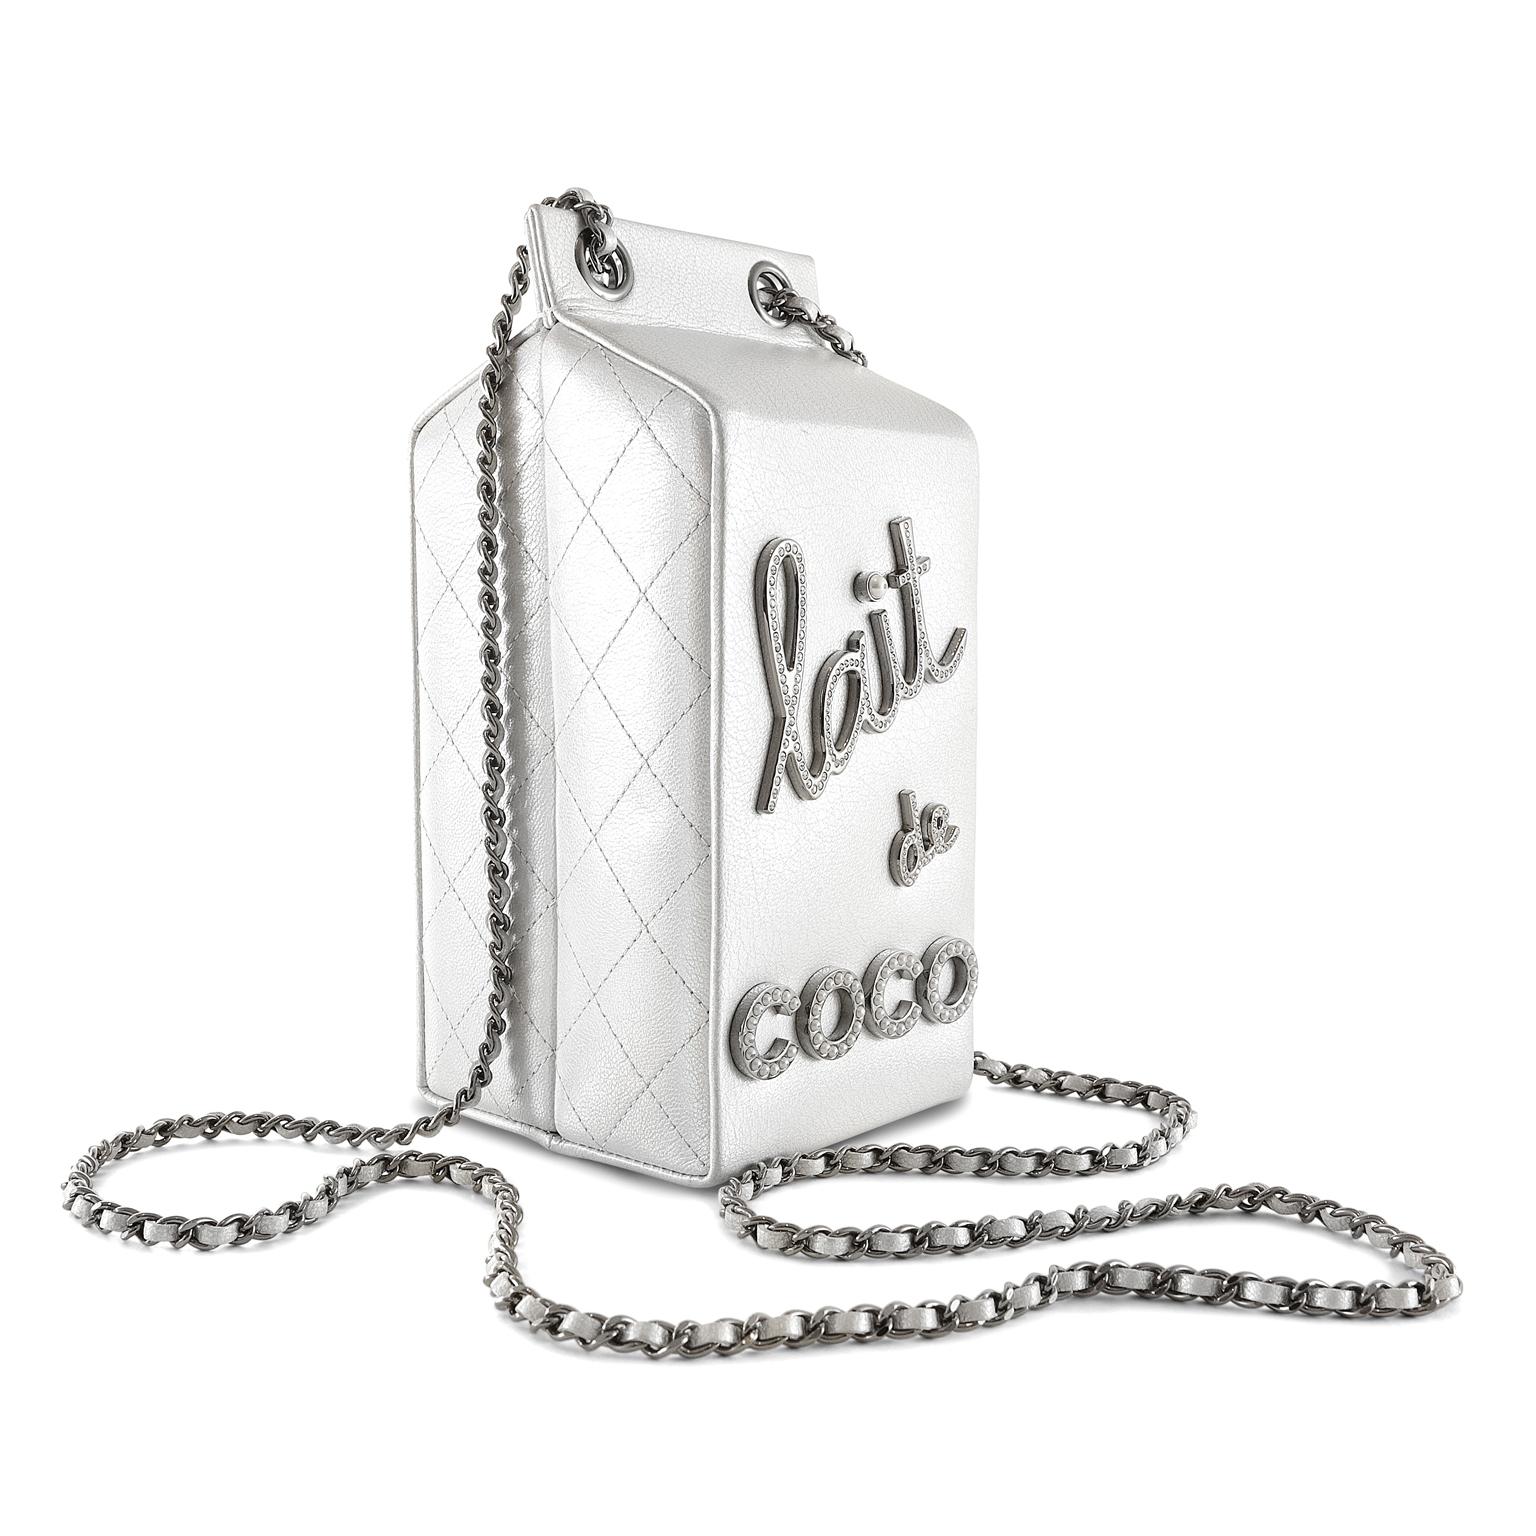 Chanel Lait de Coco Silver Runway Bag- Pristine Condition
From the 2014 collection, it is an extremely rare and collectible item.
Silver iridescent leather milk carton silhouette is embellished with “lait de COCO” lettering in crystal and faux